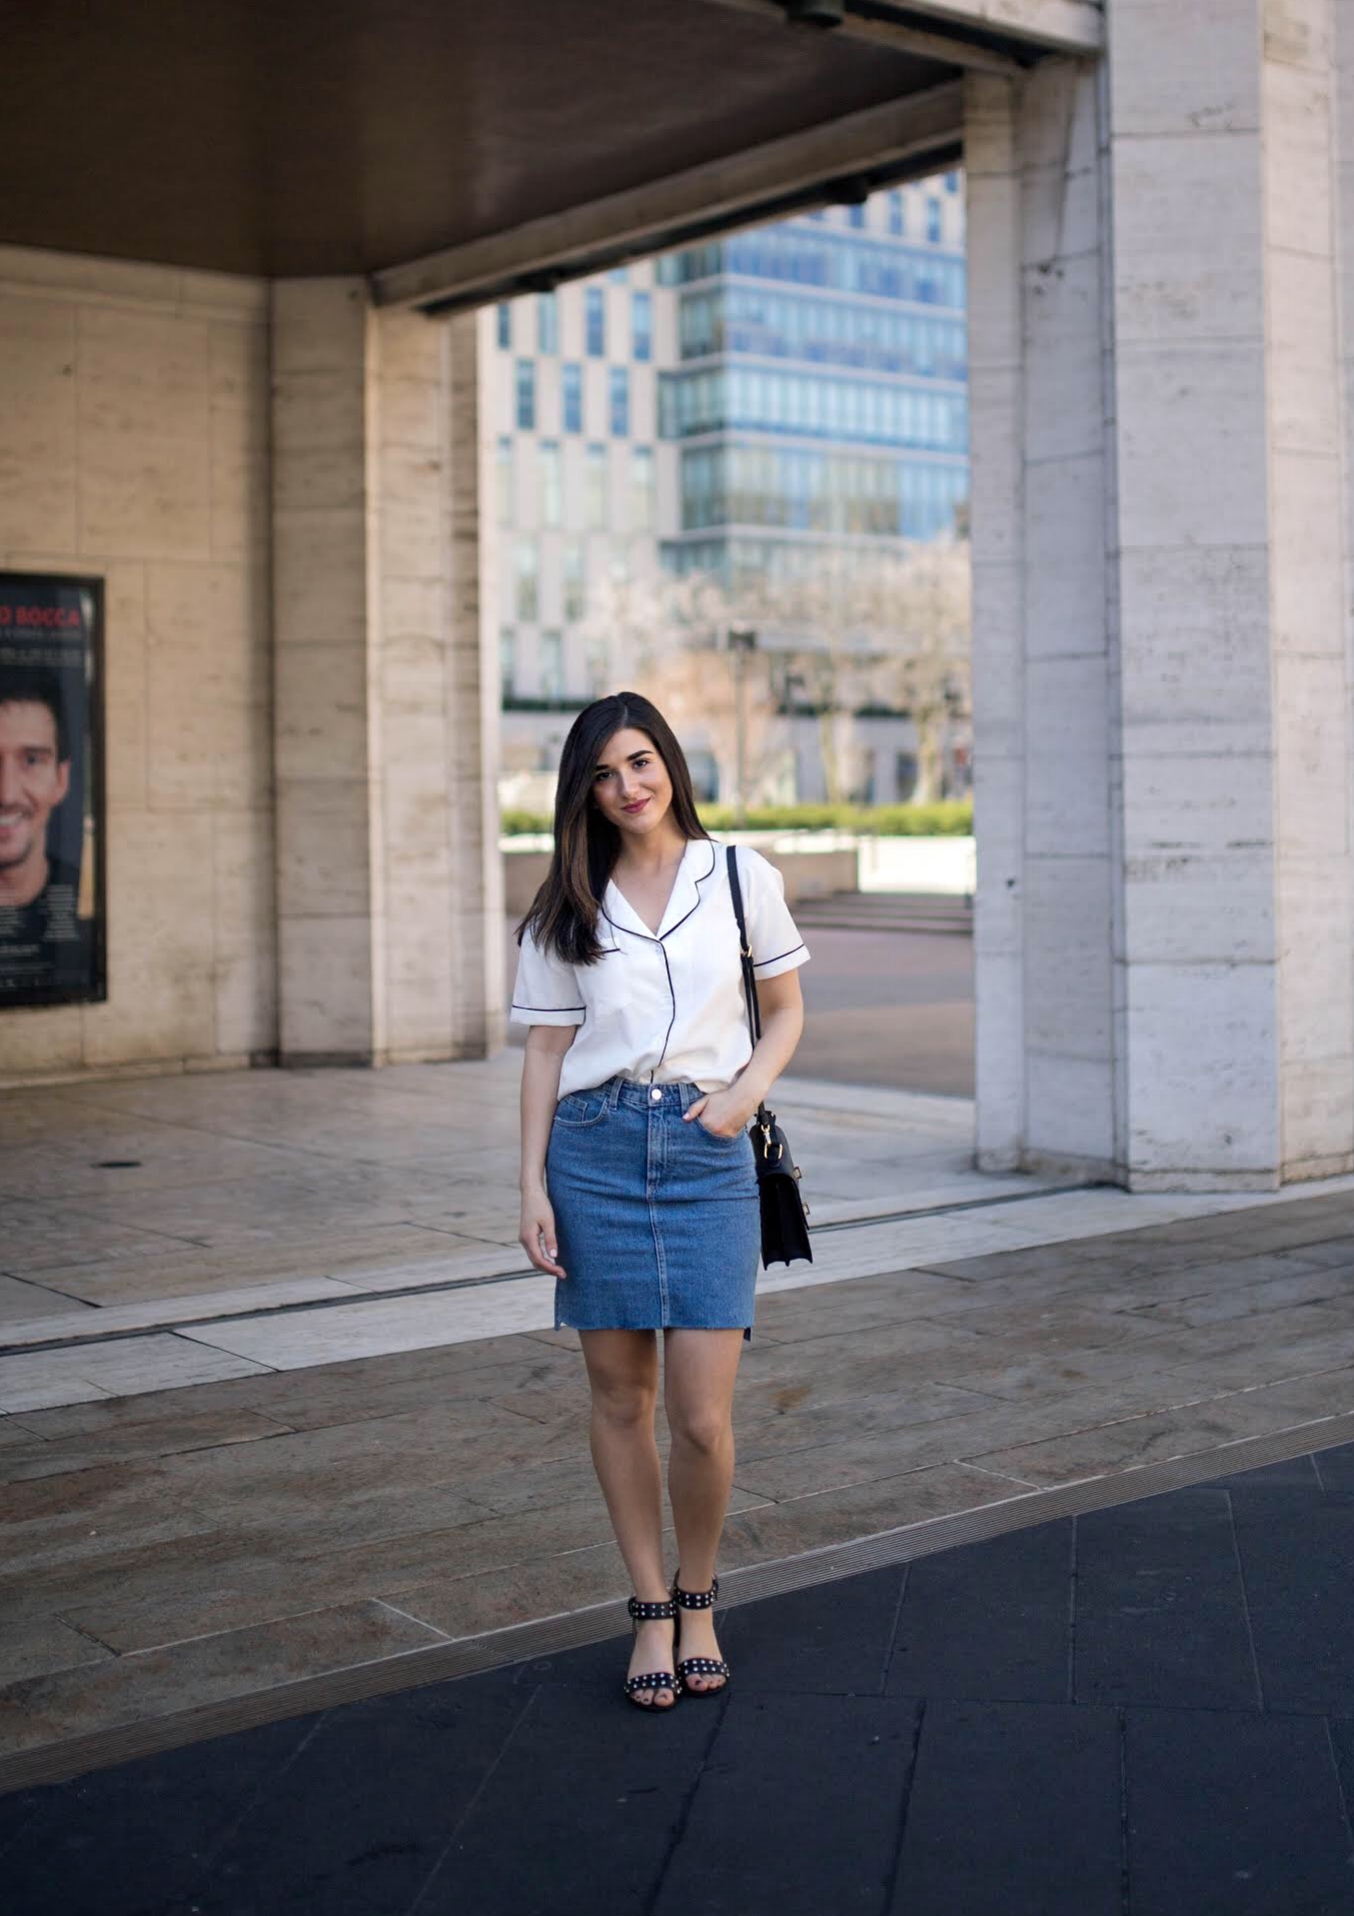 Pajama Top Denim Skirt 4 Reasons to Think Twice Before Signing a Contract Esther Santer Fashion Blog NYC Street Style Blogger Outfit OOTD Trendy Collar Light Jean Studded Sandals Shoes Summer Look Inspo Hair Photoshoot Model Women Girl Purse Shopping.jpg